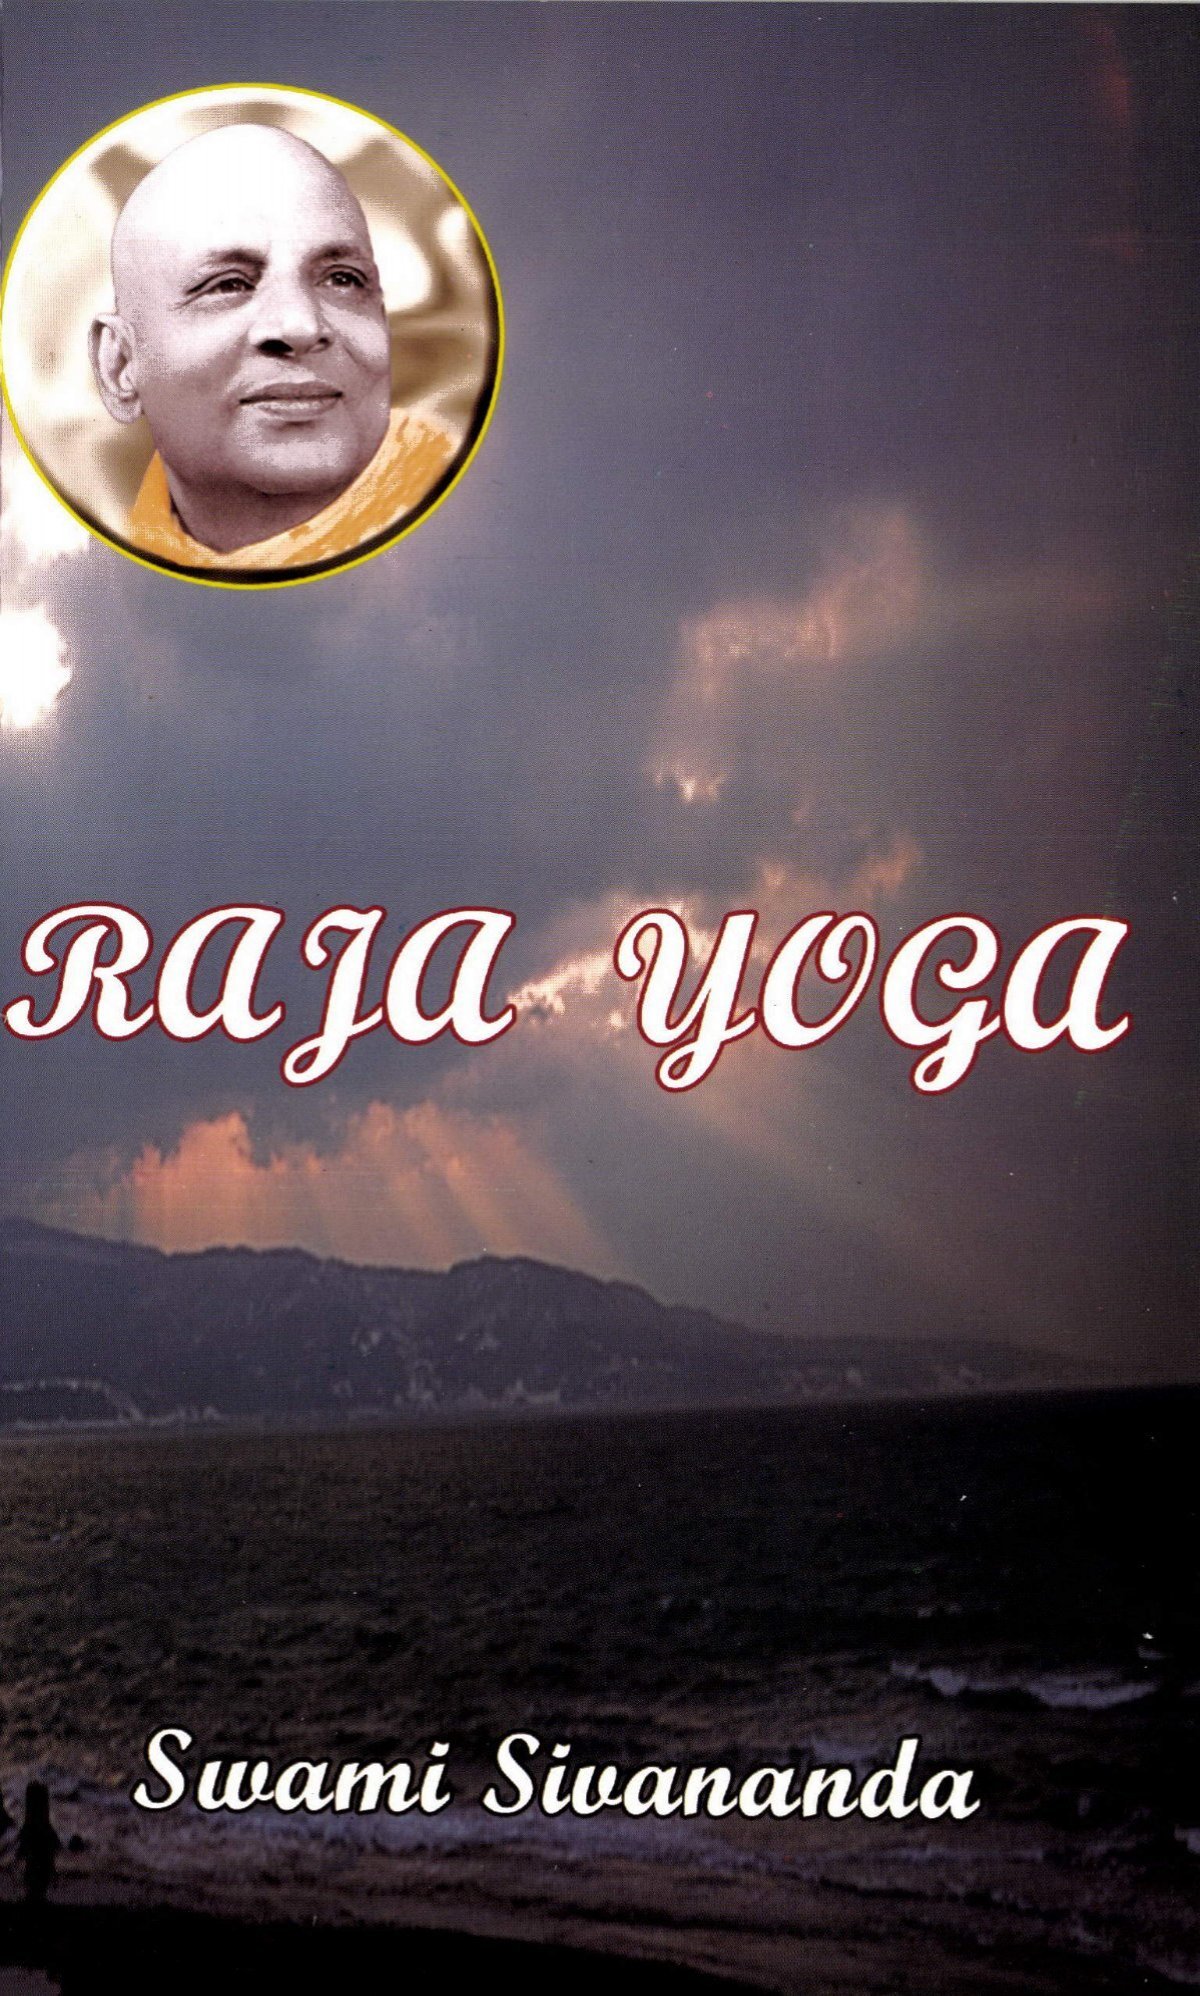 109 books on Yoga and Philosophy (Free Download) - PDF format